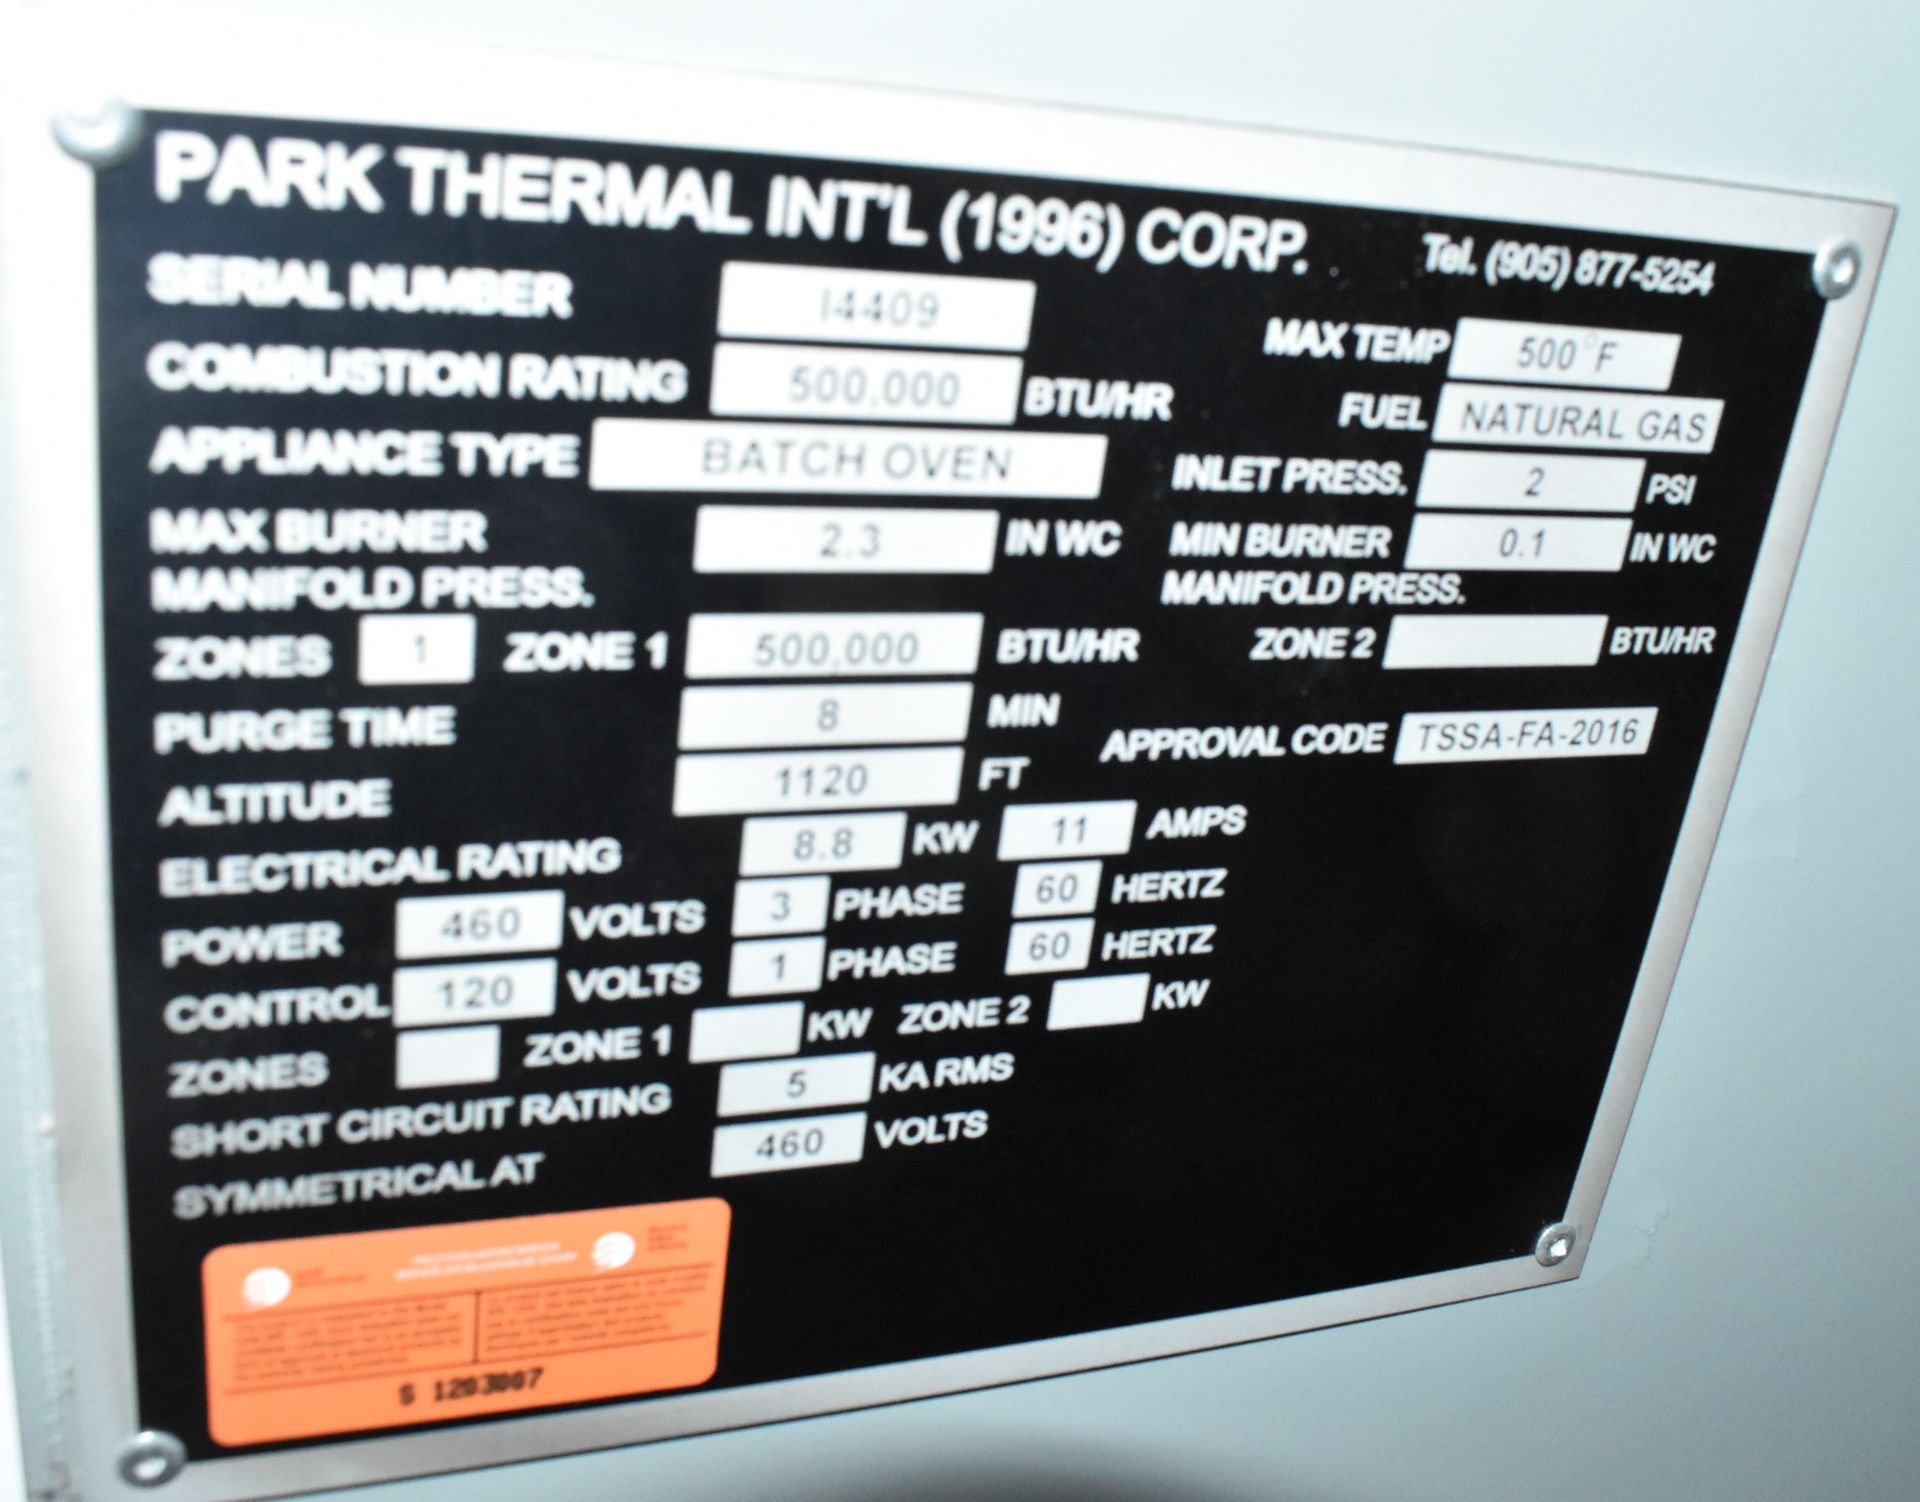 PARK THERMAL NATURAL GAS FIRED BATCH OVEN WITH 500 DEG. F. MAX. TEMPERATURE, 500,000 BTU/HR, 60" - Image 6 of 6